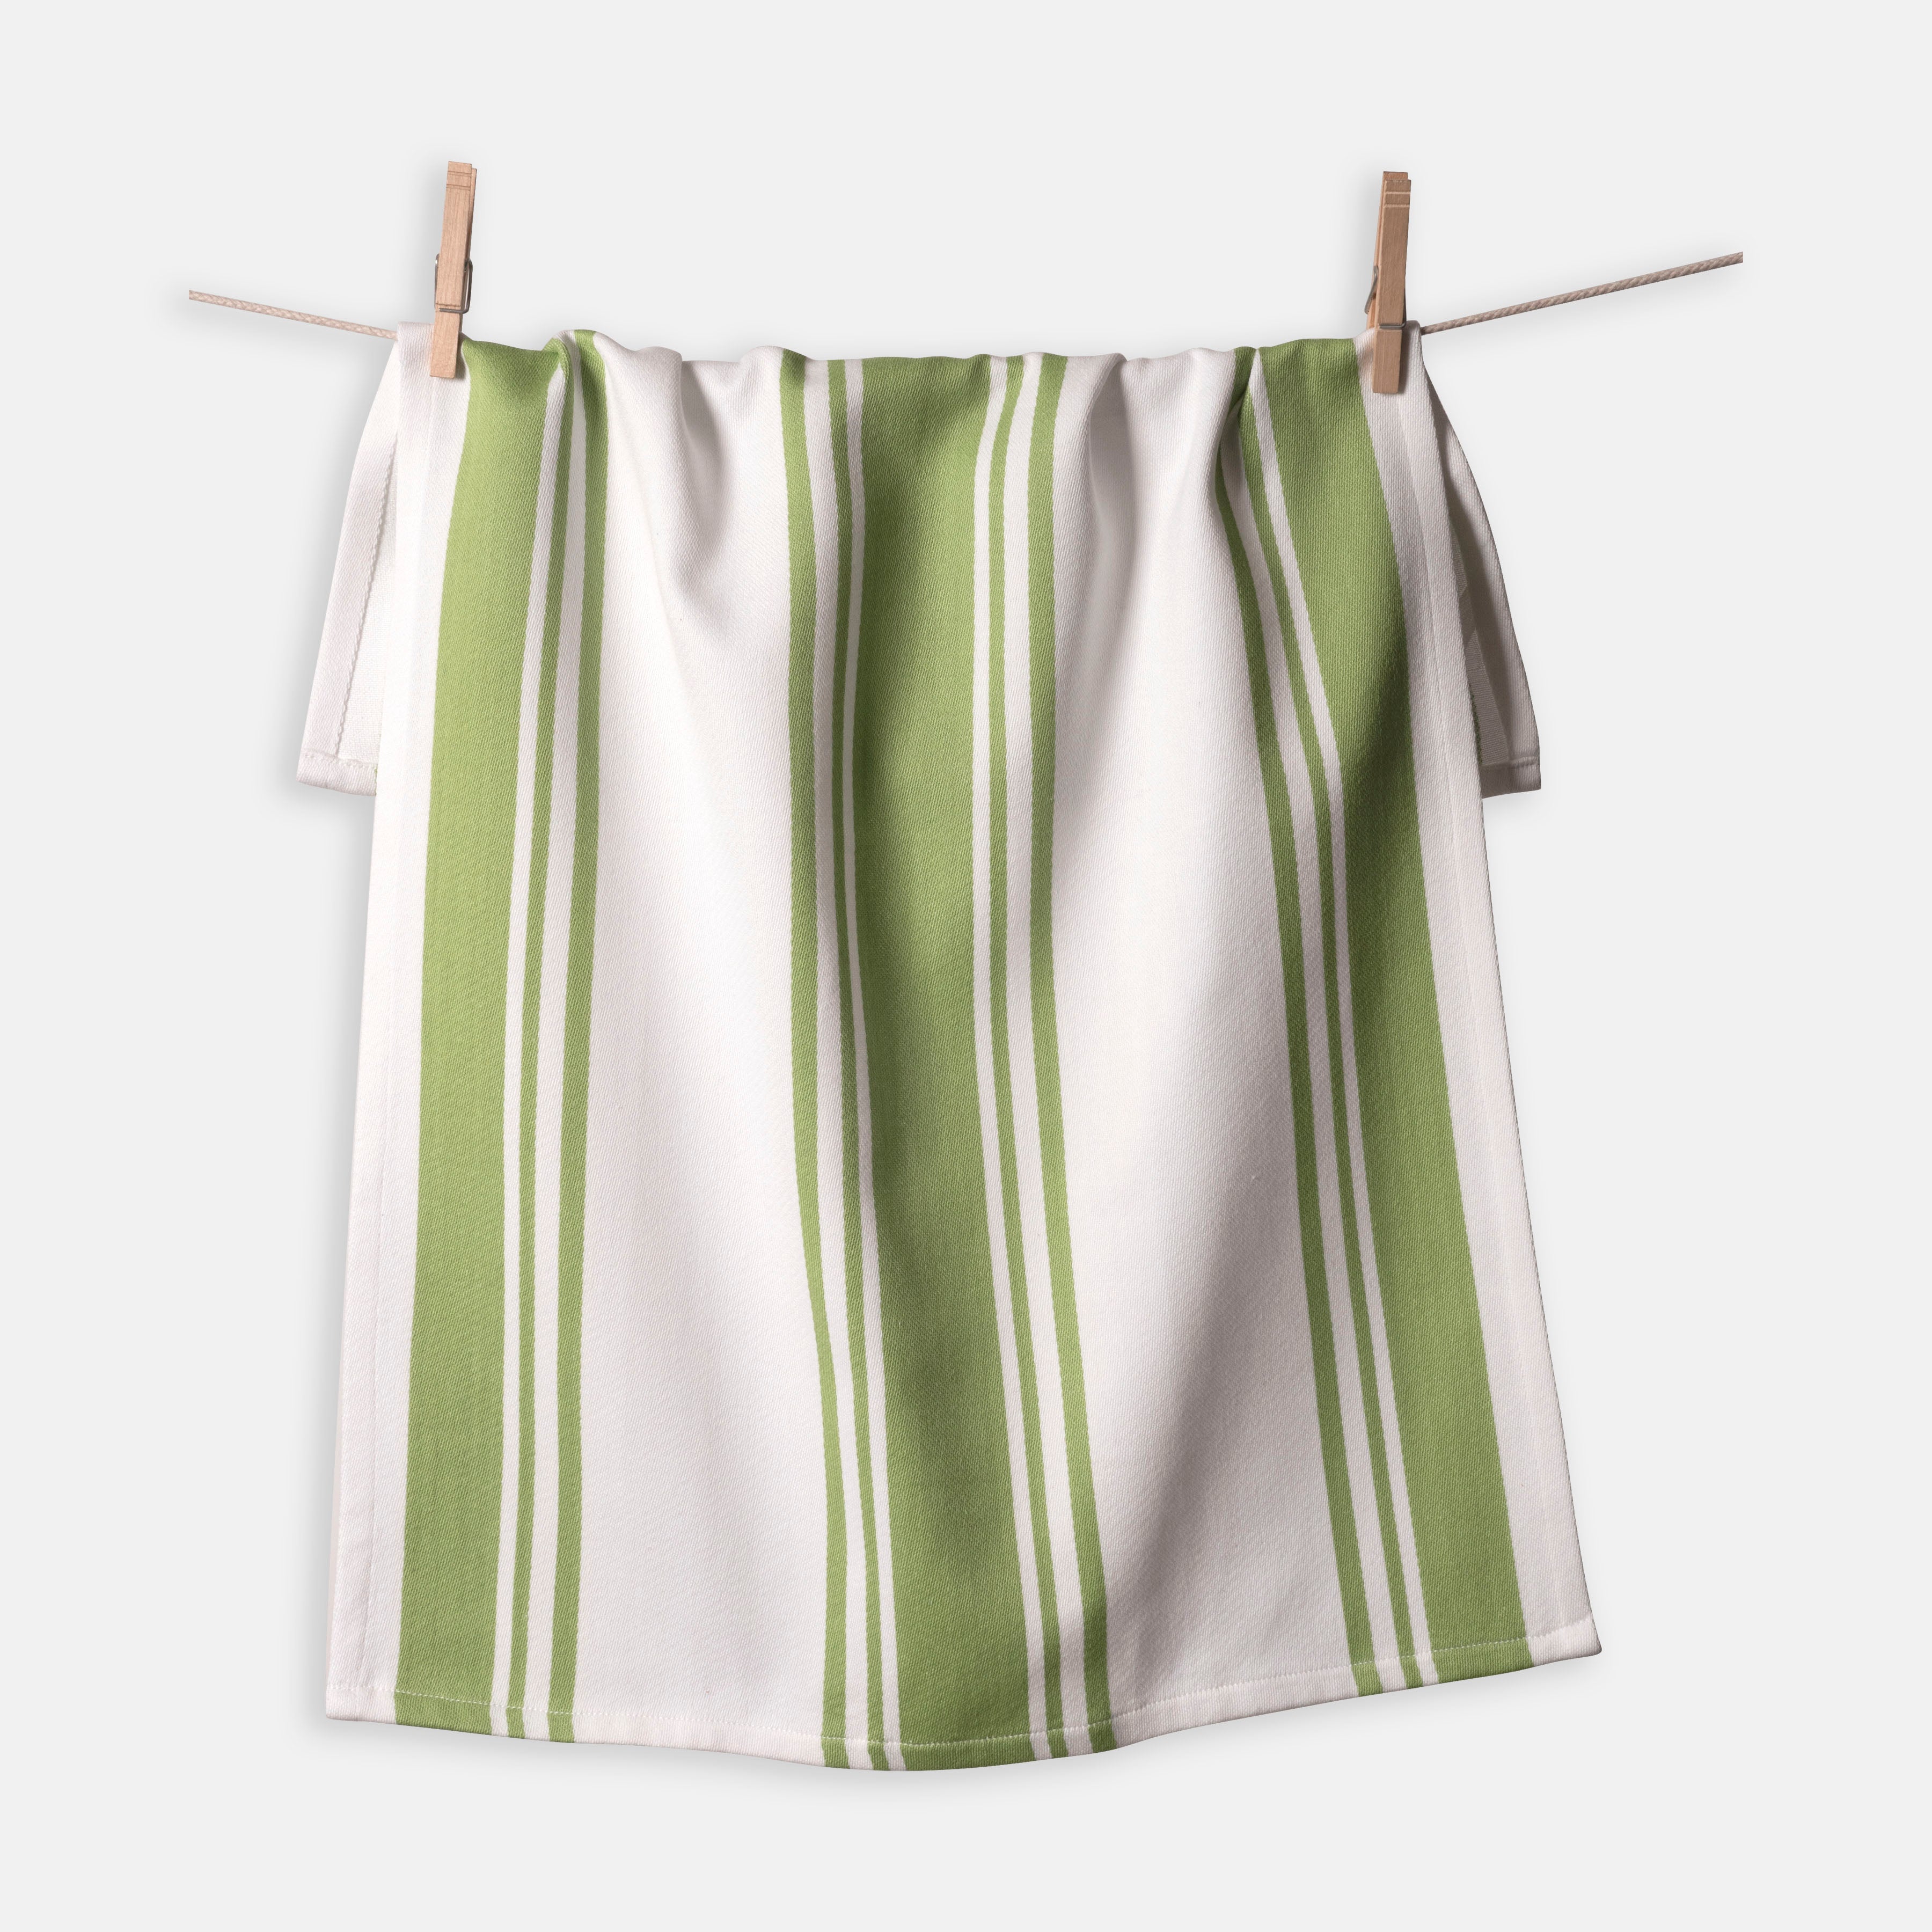 KAF Home Set of 4 Linden Reversible Terry Kitchen Towels - 18 x 28 Inches,  100% Cotton - French Green